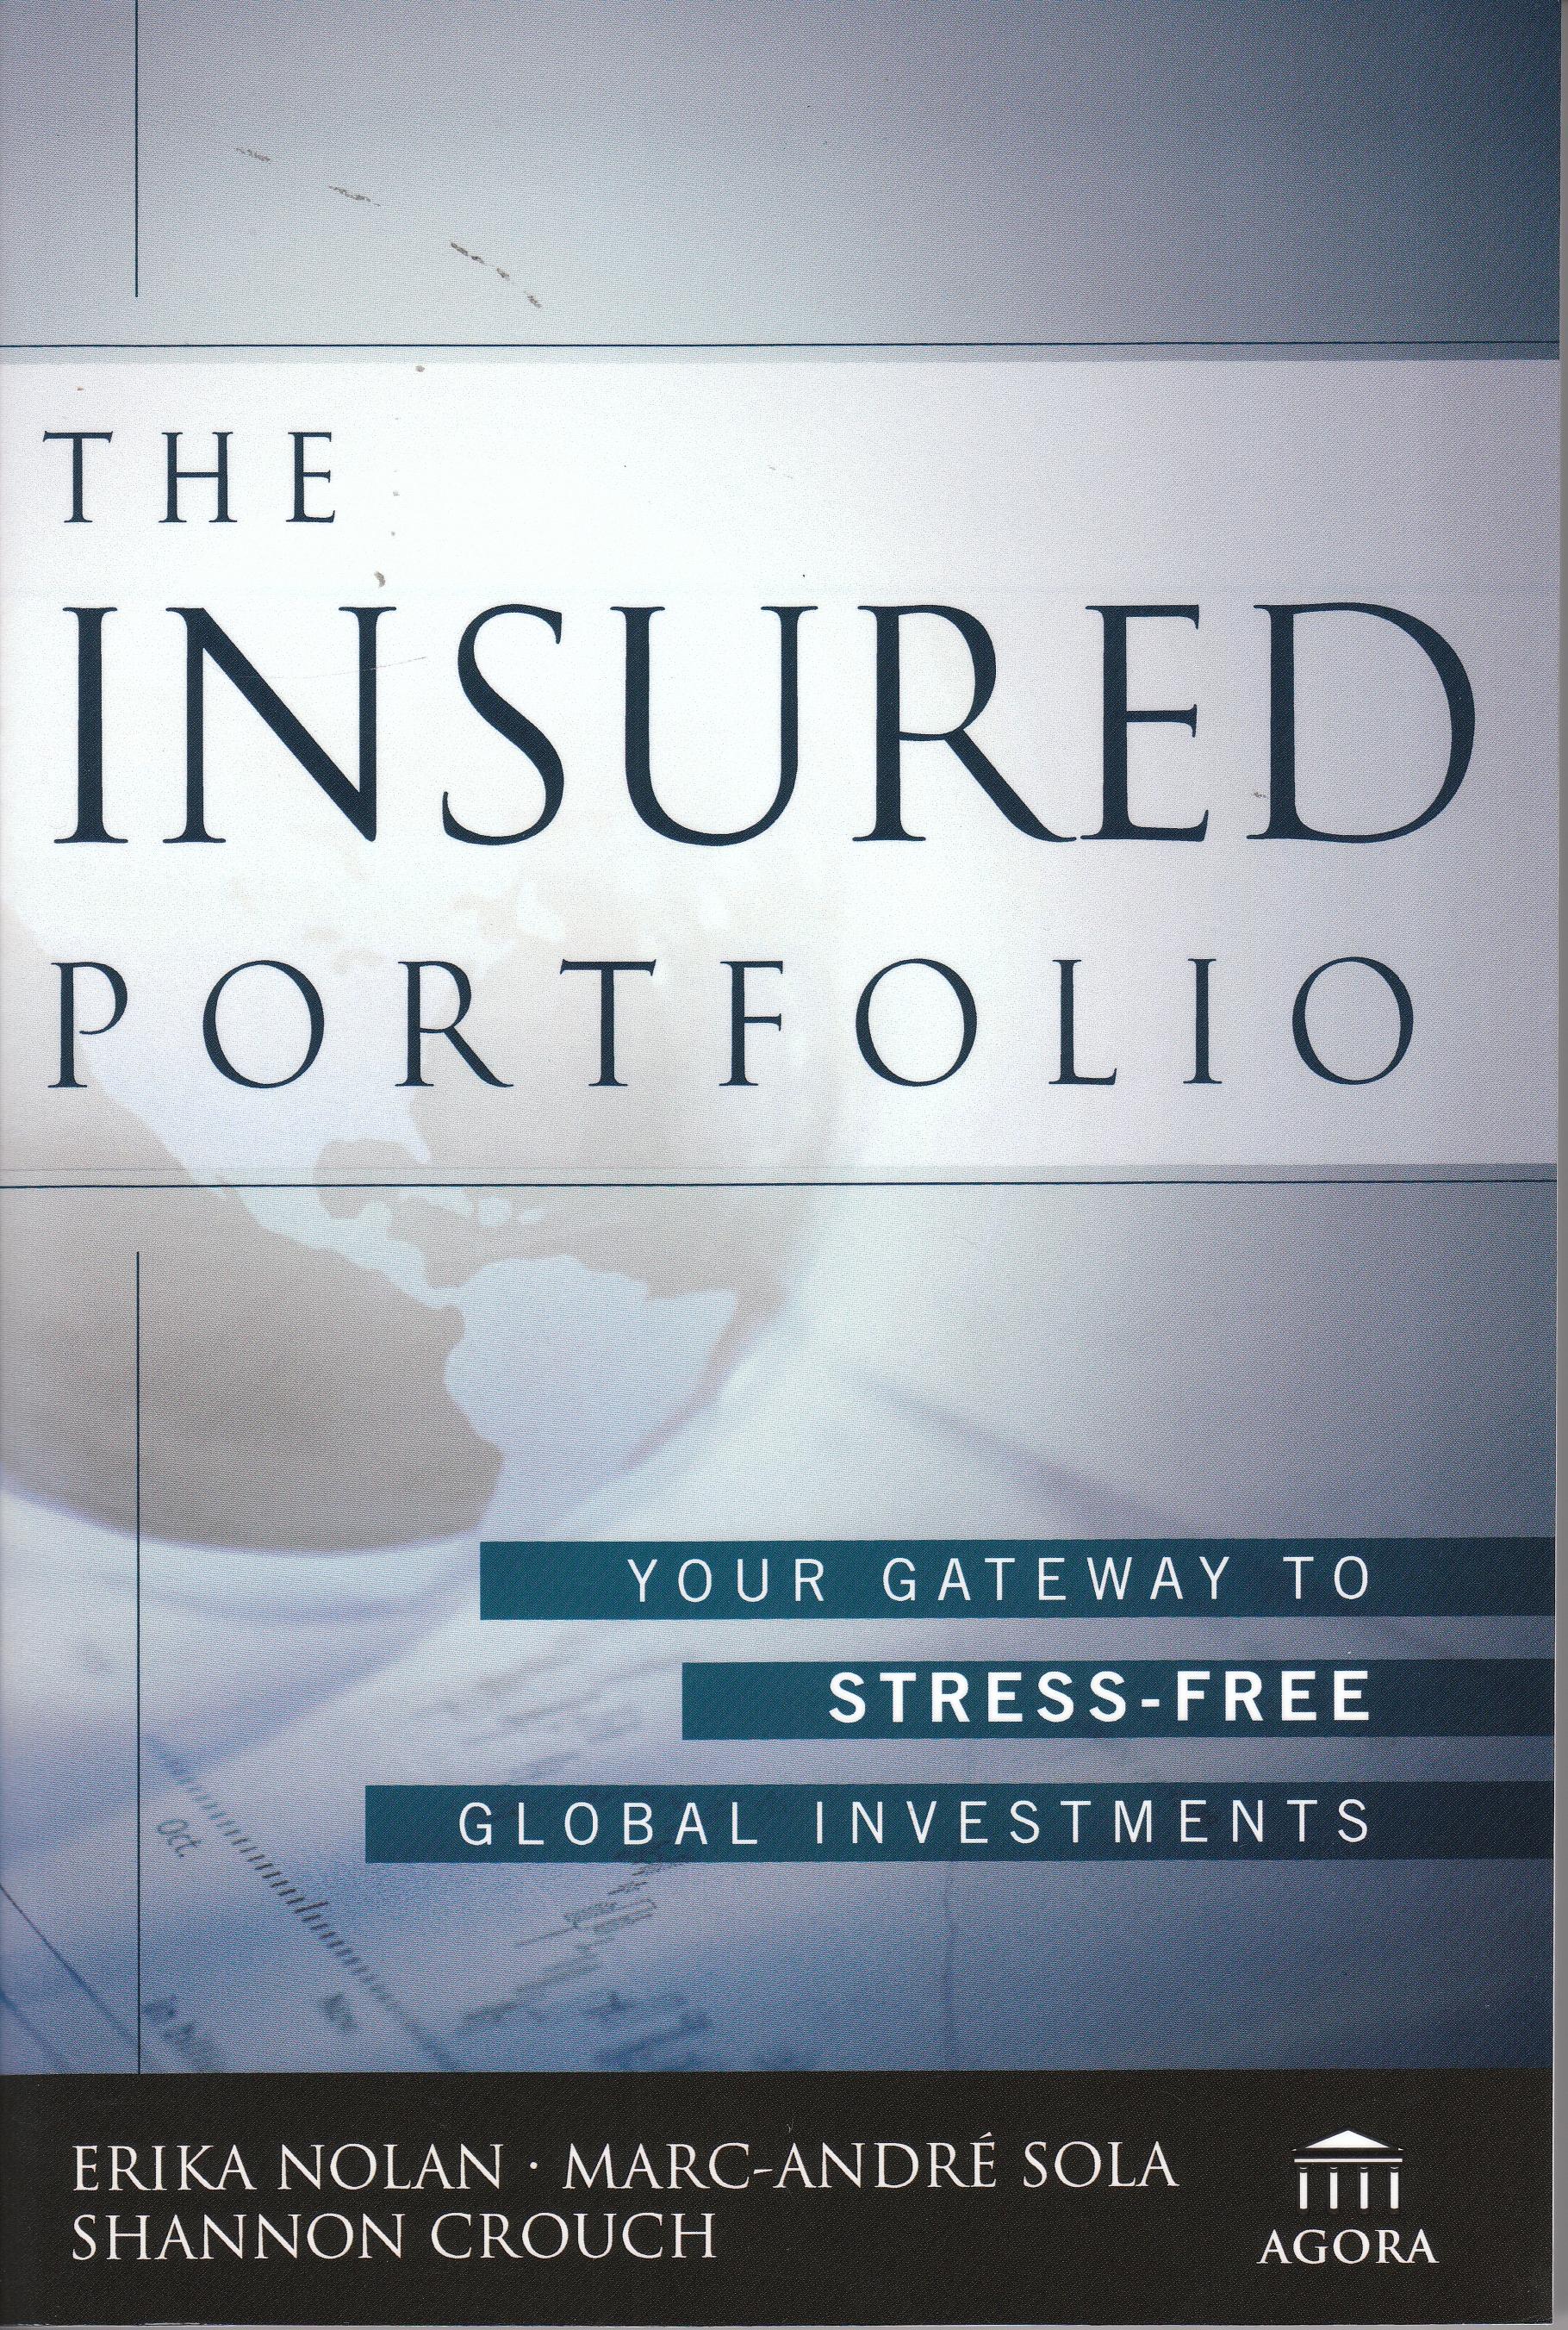 The Insured Portfolio "Your Gateway to Stress-Free Global Investments"